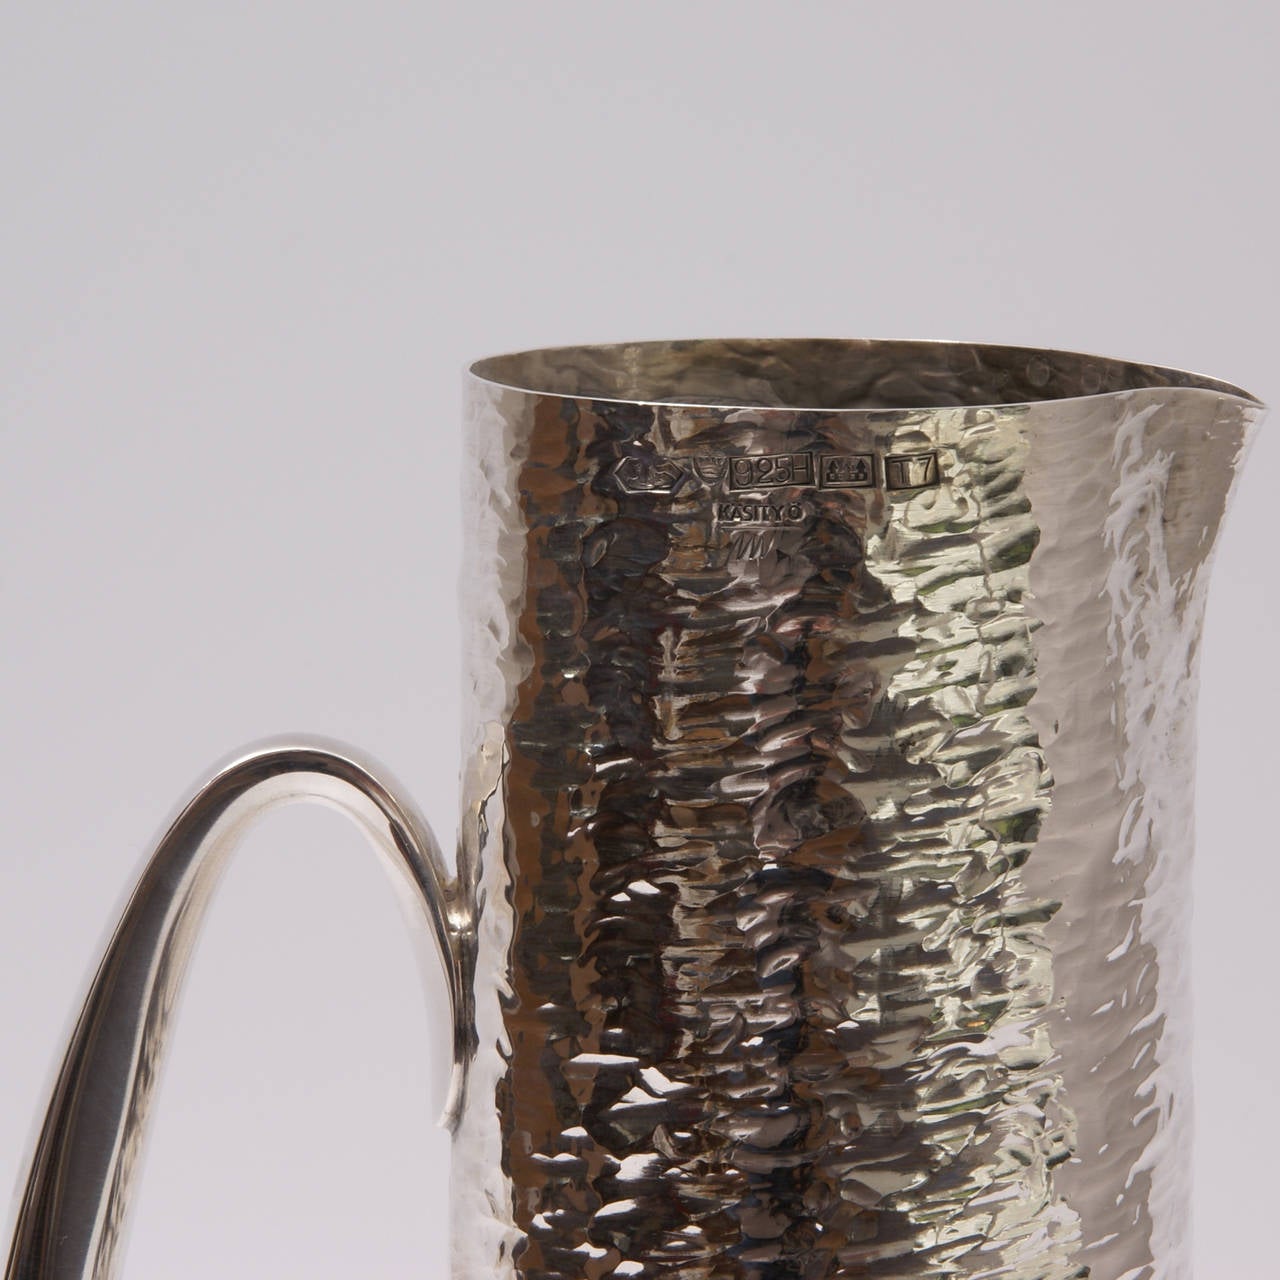 Sterling silver pitcher model TW 761 designed by Tapio Wirkkala in 1962-1963, this piece executed in 1964 by Kultakeskus Oy.
References: 